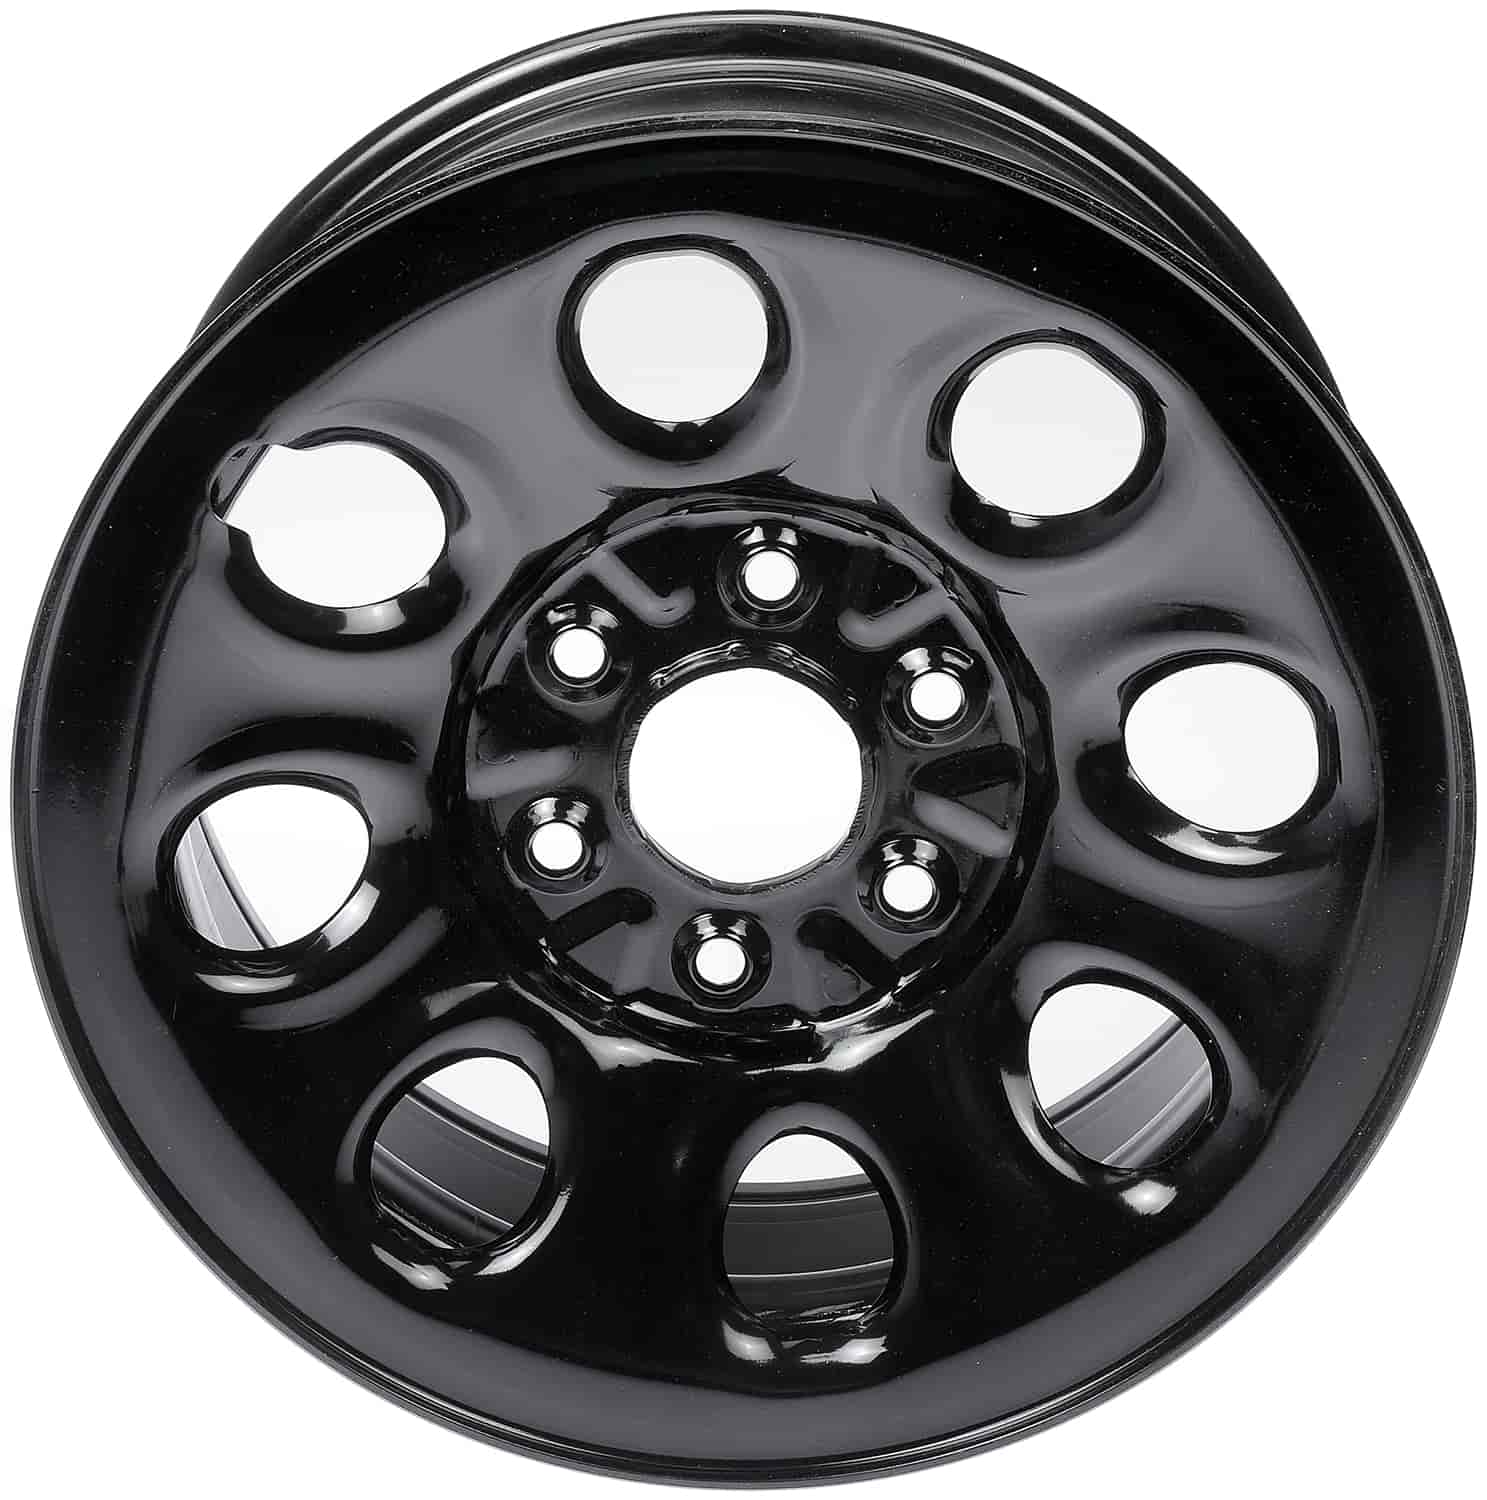 Dorman Products 939-233: Steel Wheel for 2007-2014 Cadillac, Chevrolet, GMC  RWD Truck/SUV [Size: 17